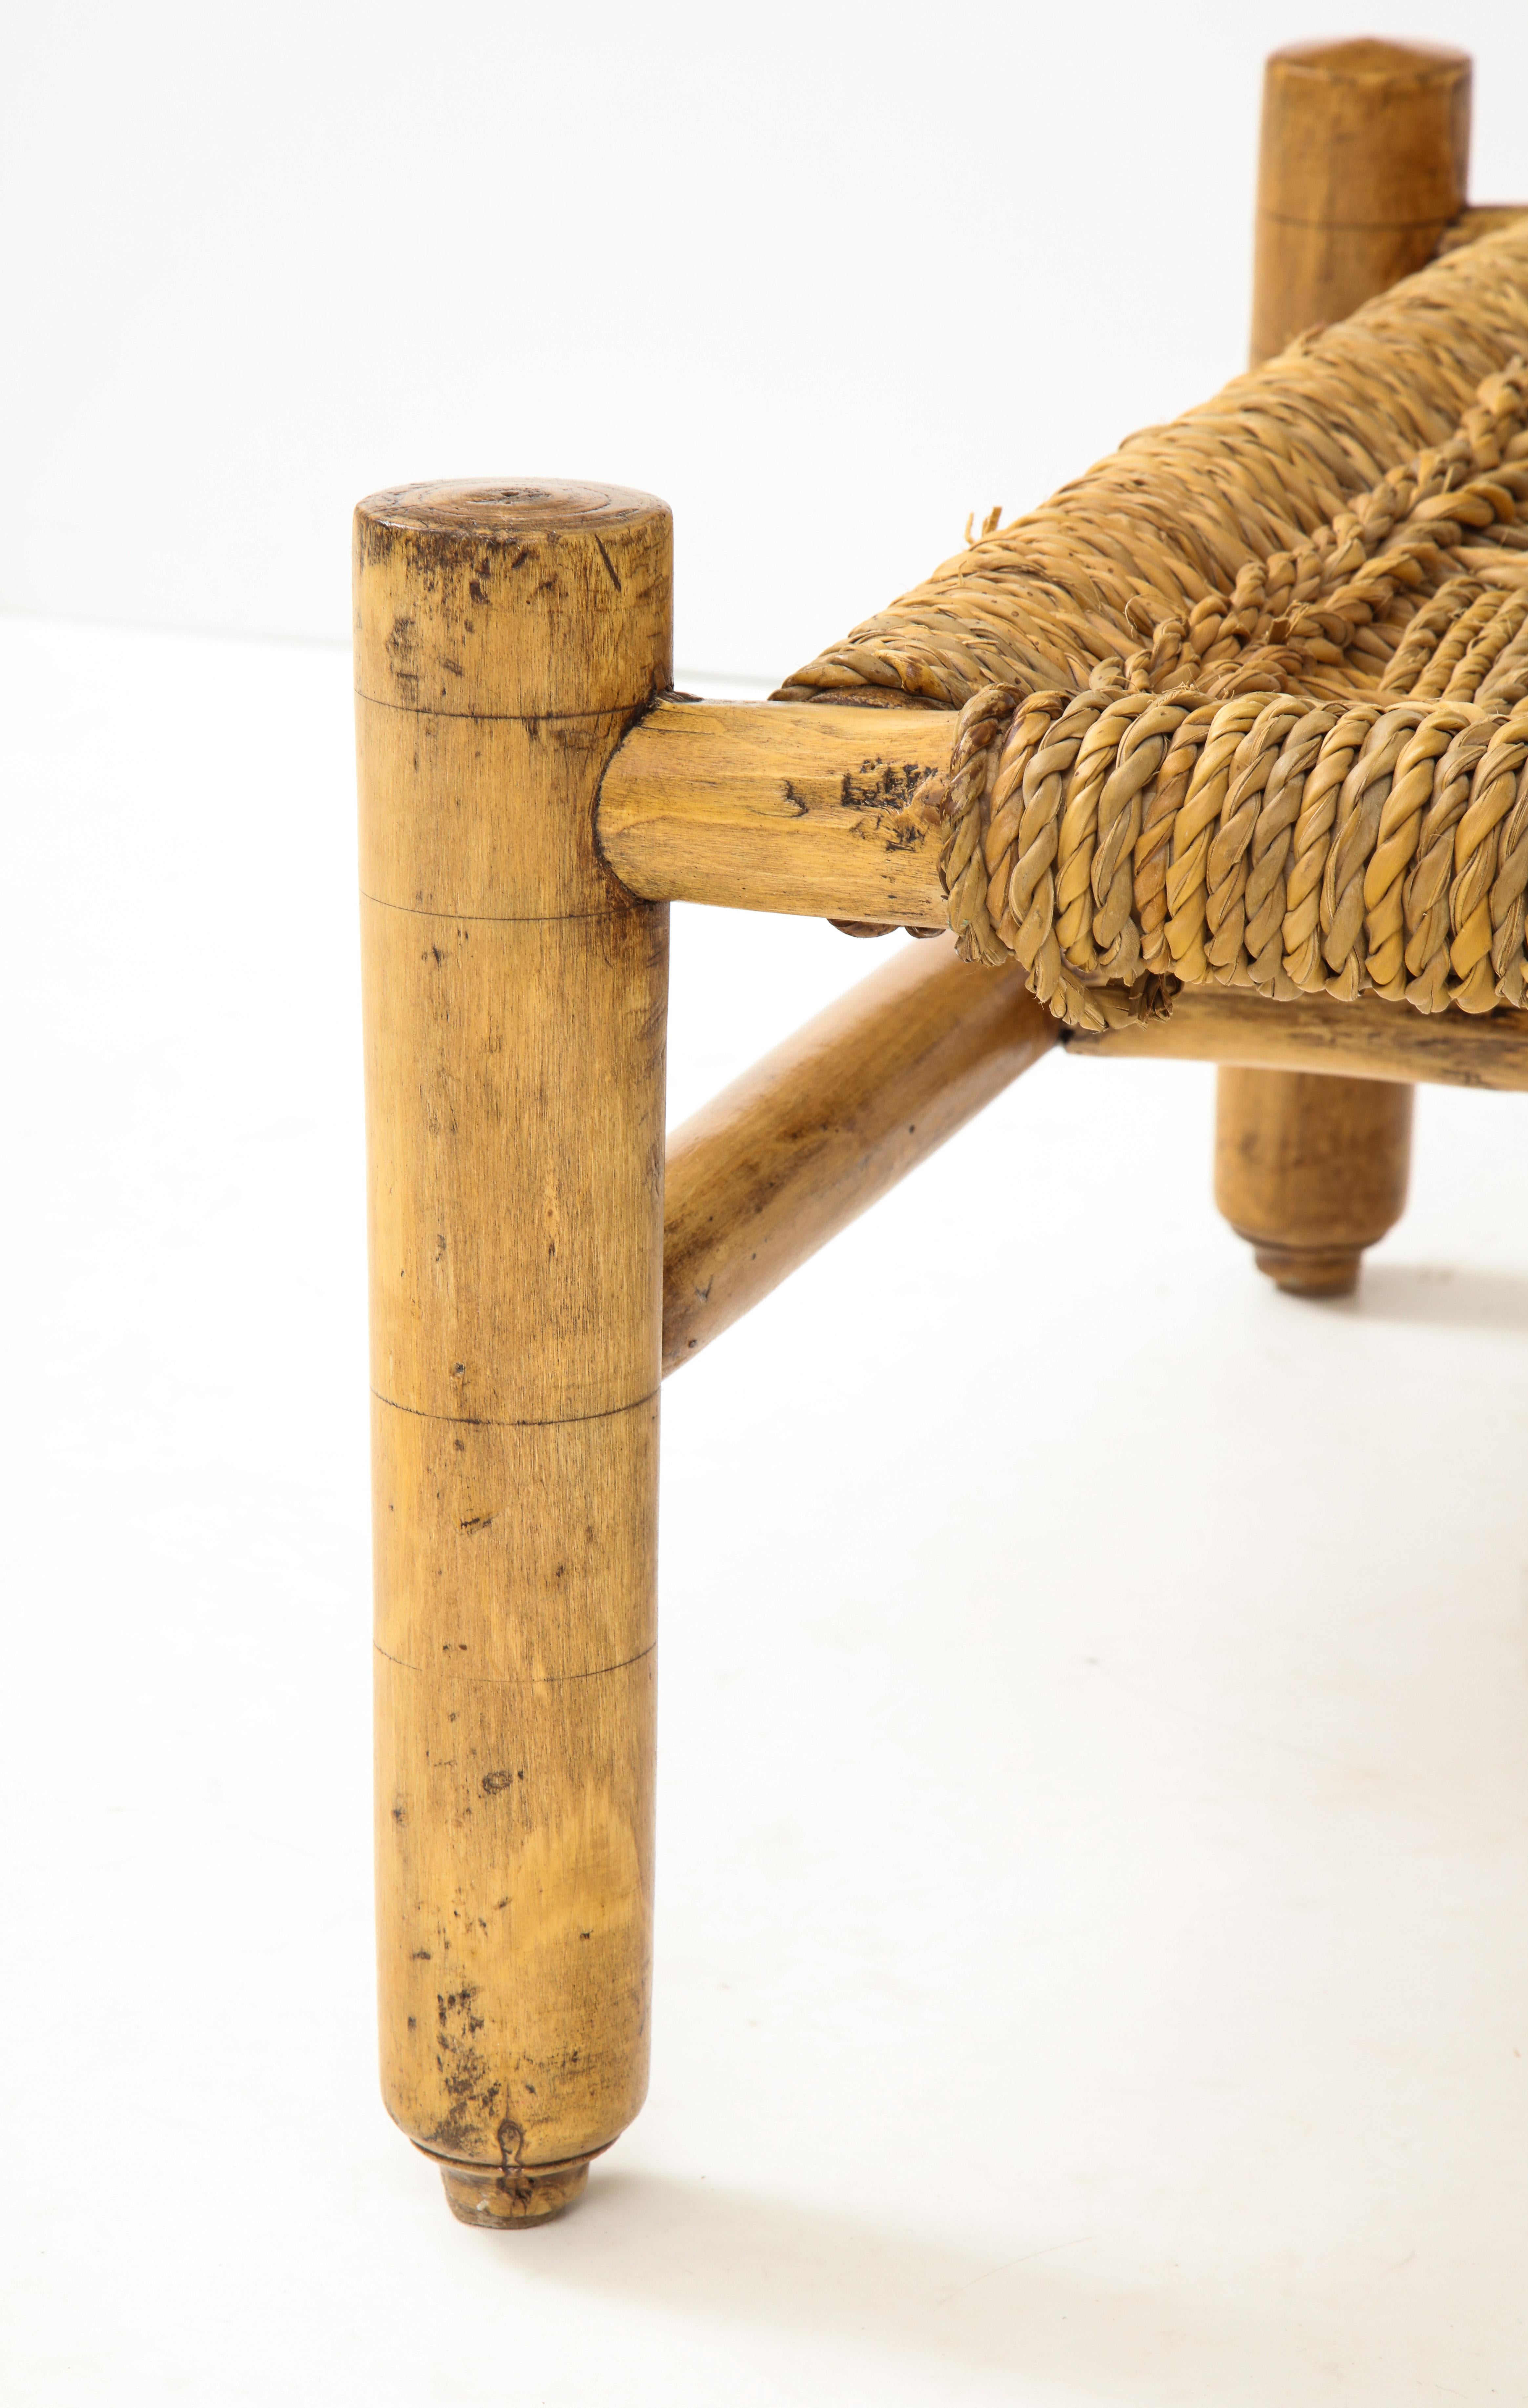 Hand-Woven Audoux & Minet Woven Rope and Wood Coffee Table or Bench